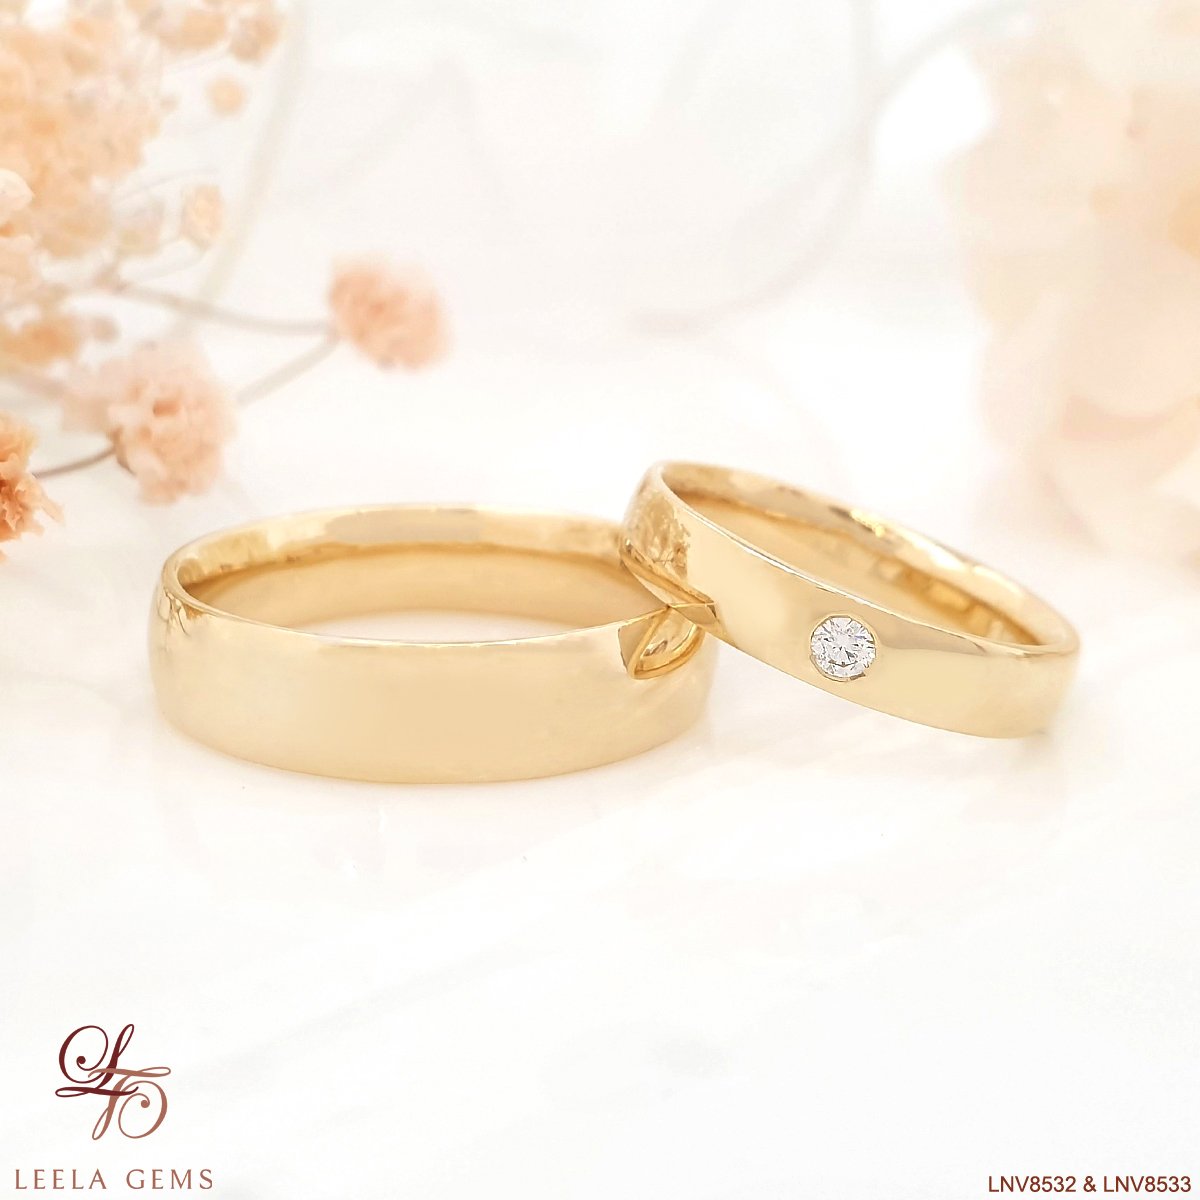 Couple Rings in 18K gold